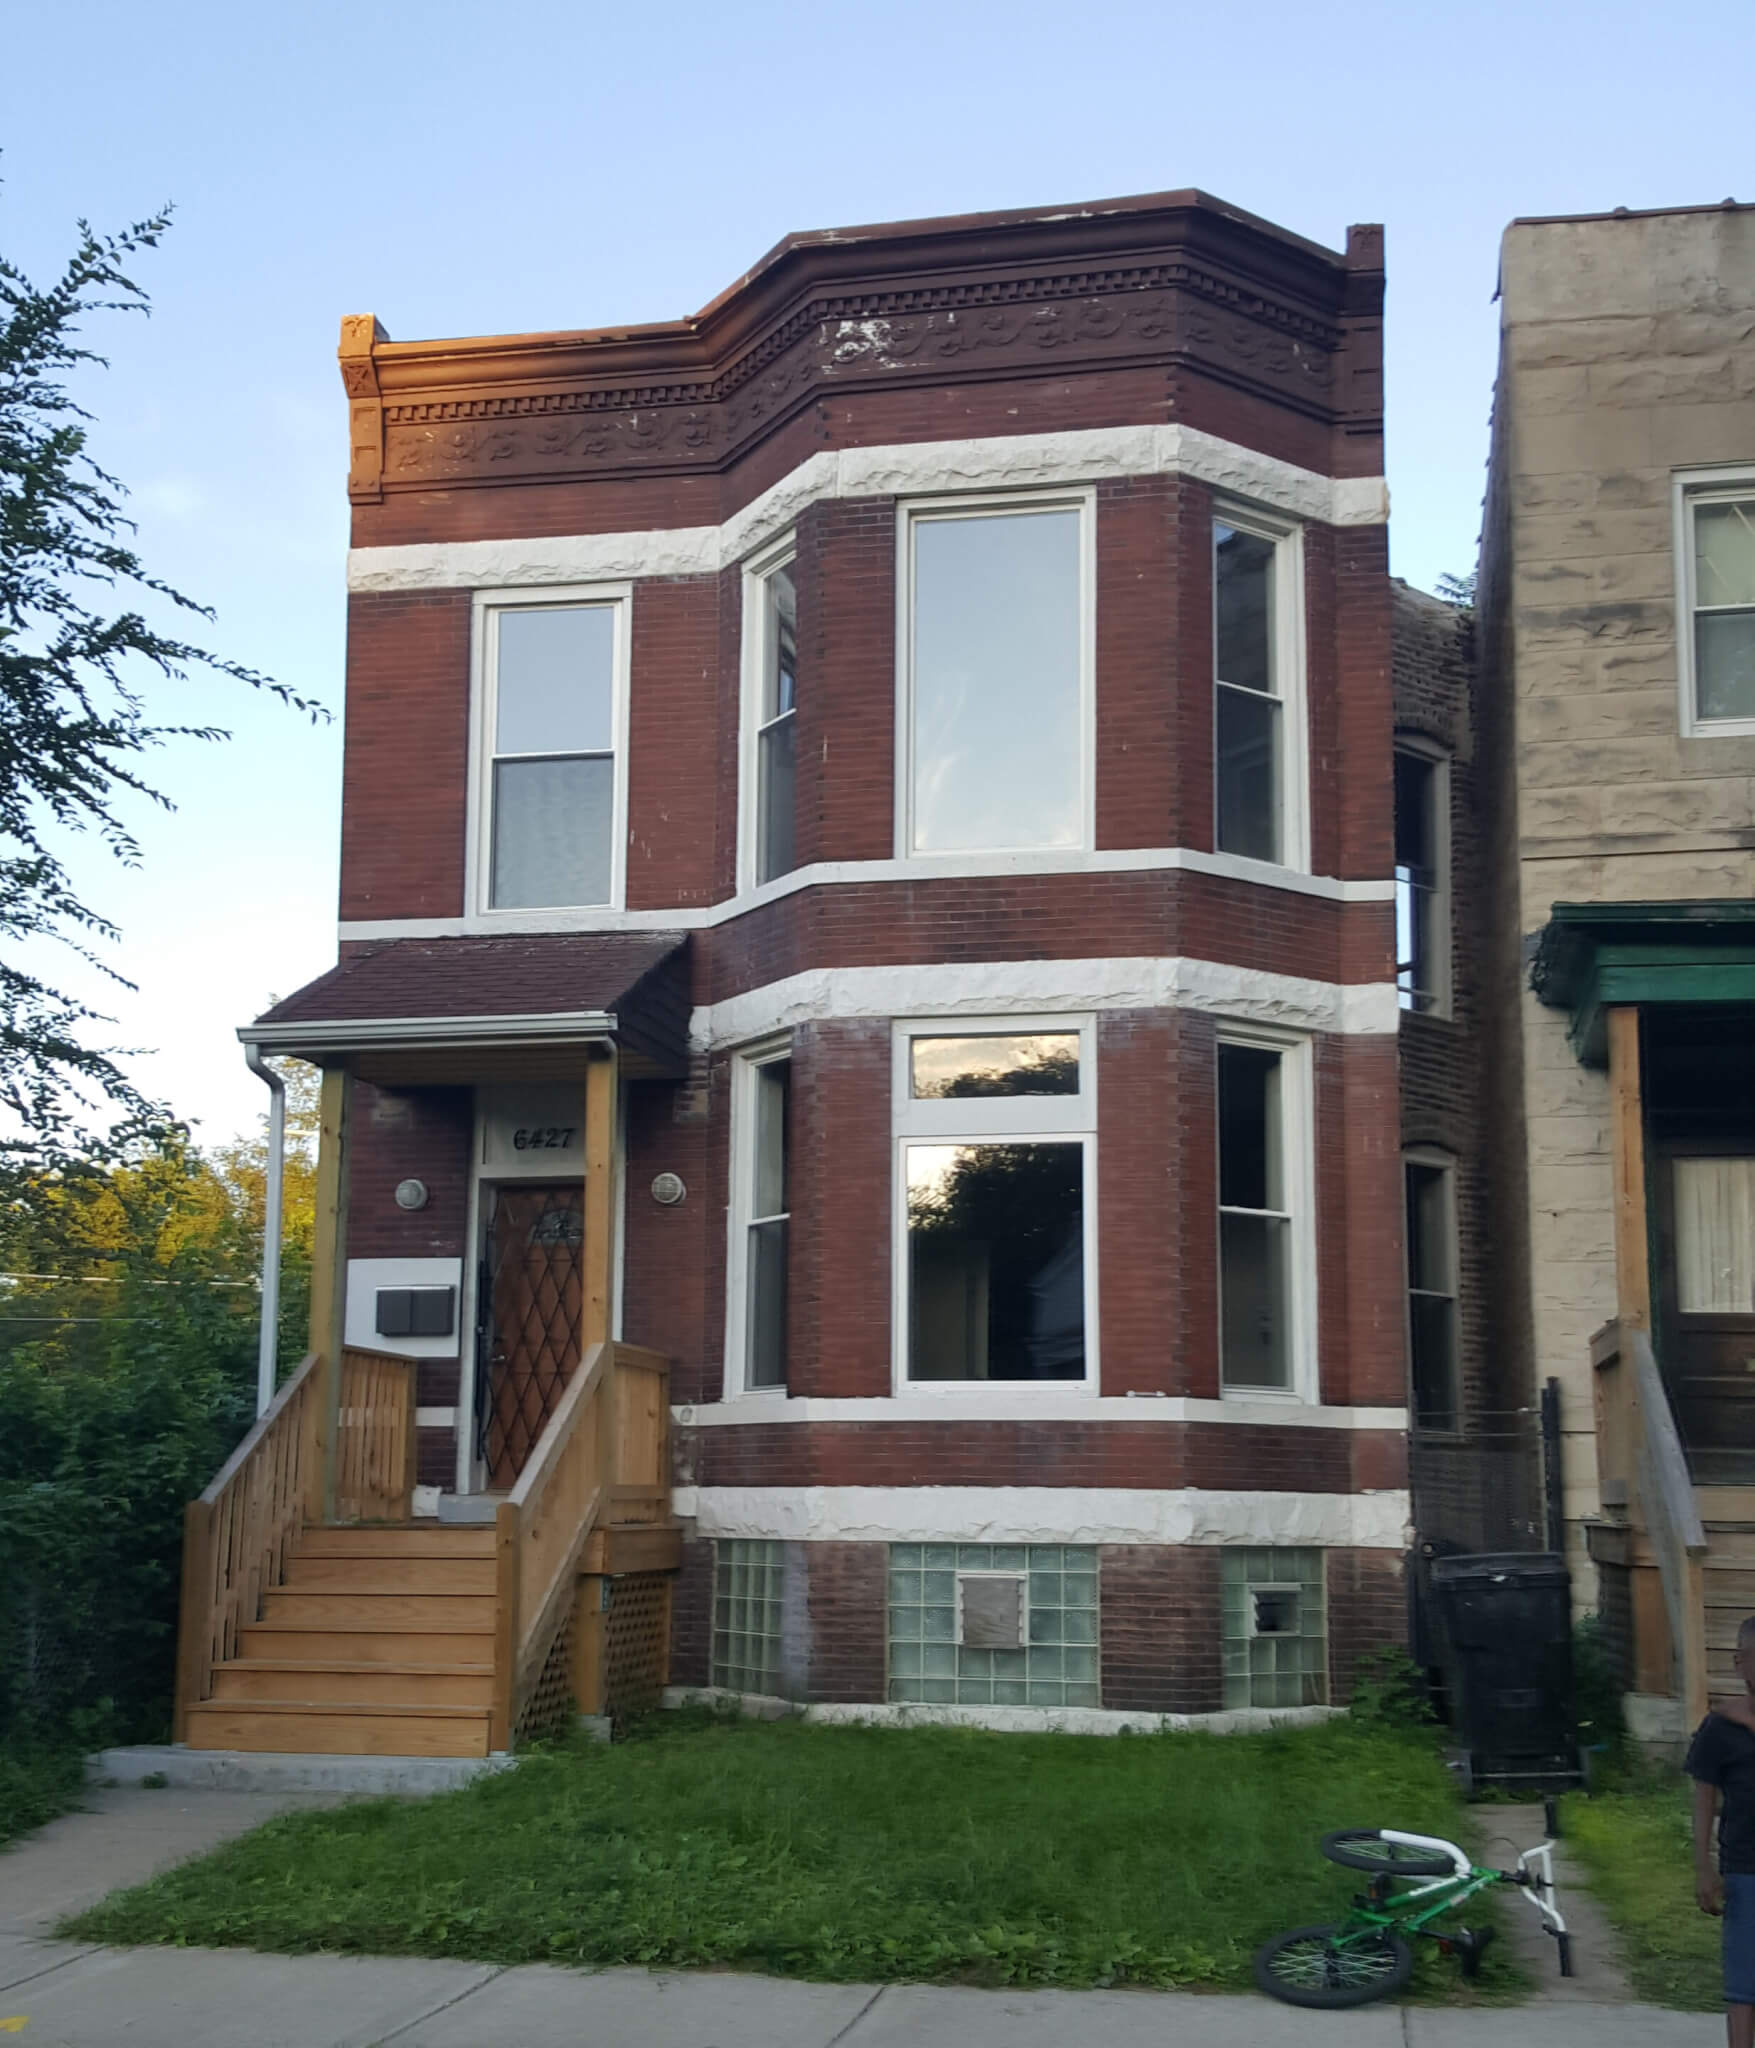 Exterior View of Emmett Till's house in South Side Chicago